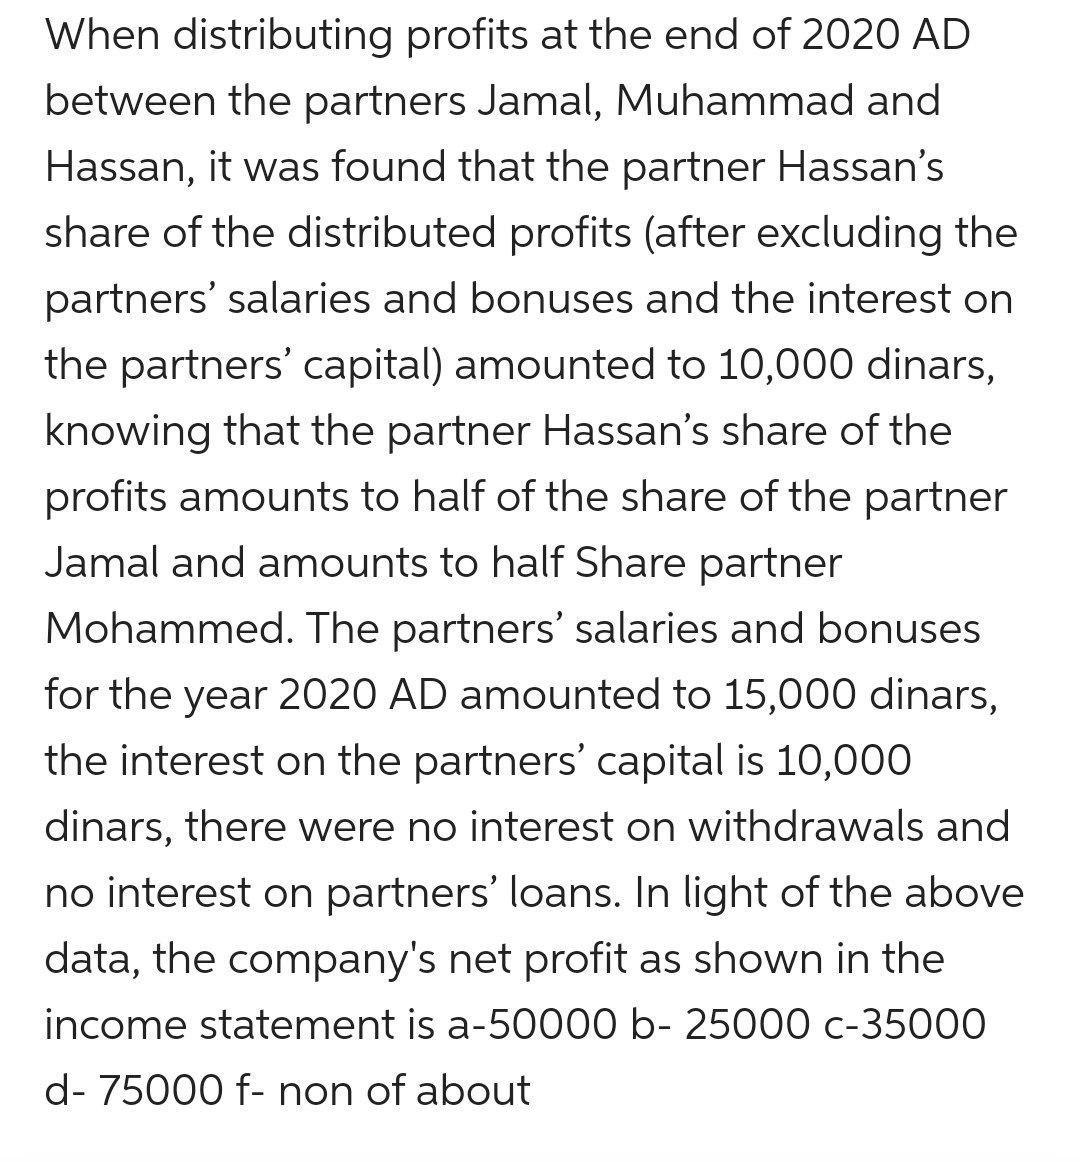 When distributing profits at the end of ( 2020 mathrm{AD} ) between the partners Jamal, Muhammad and Hassan, it was found